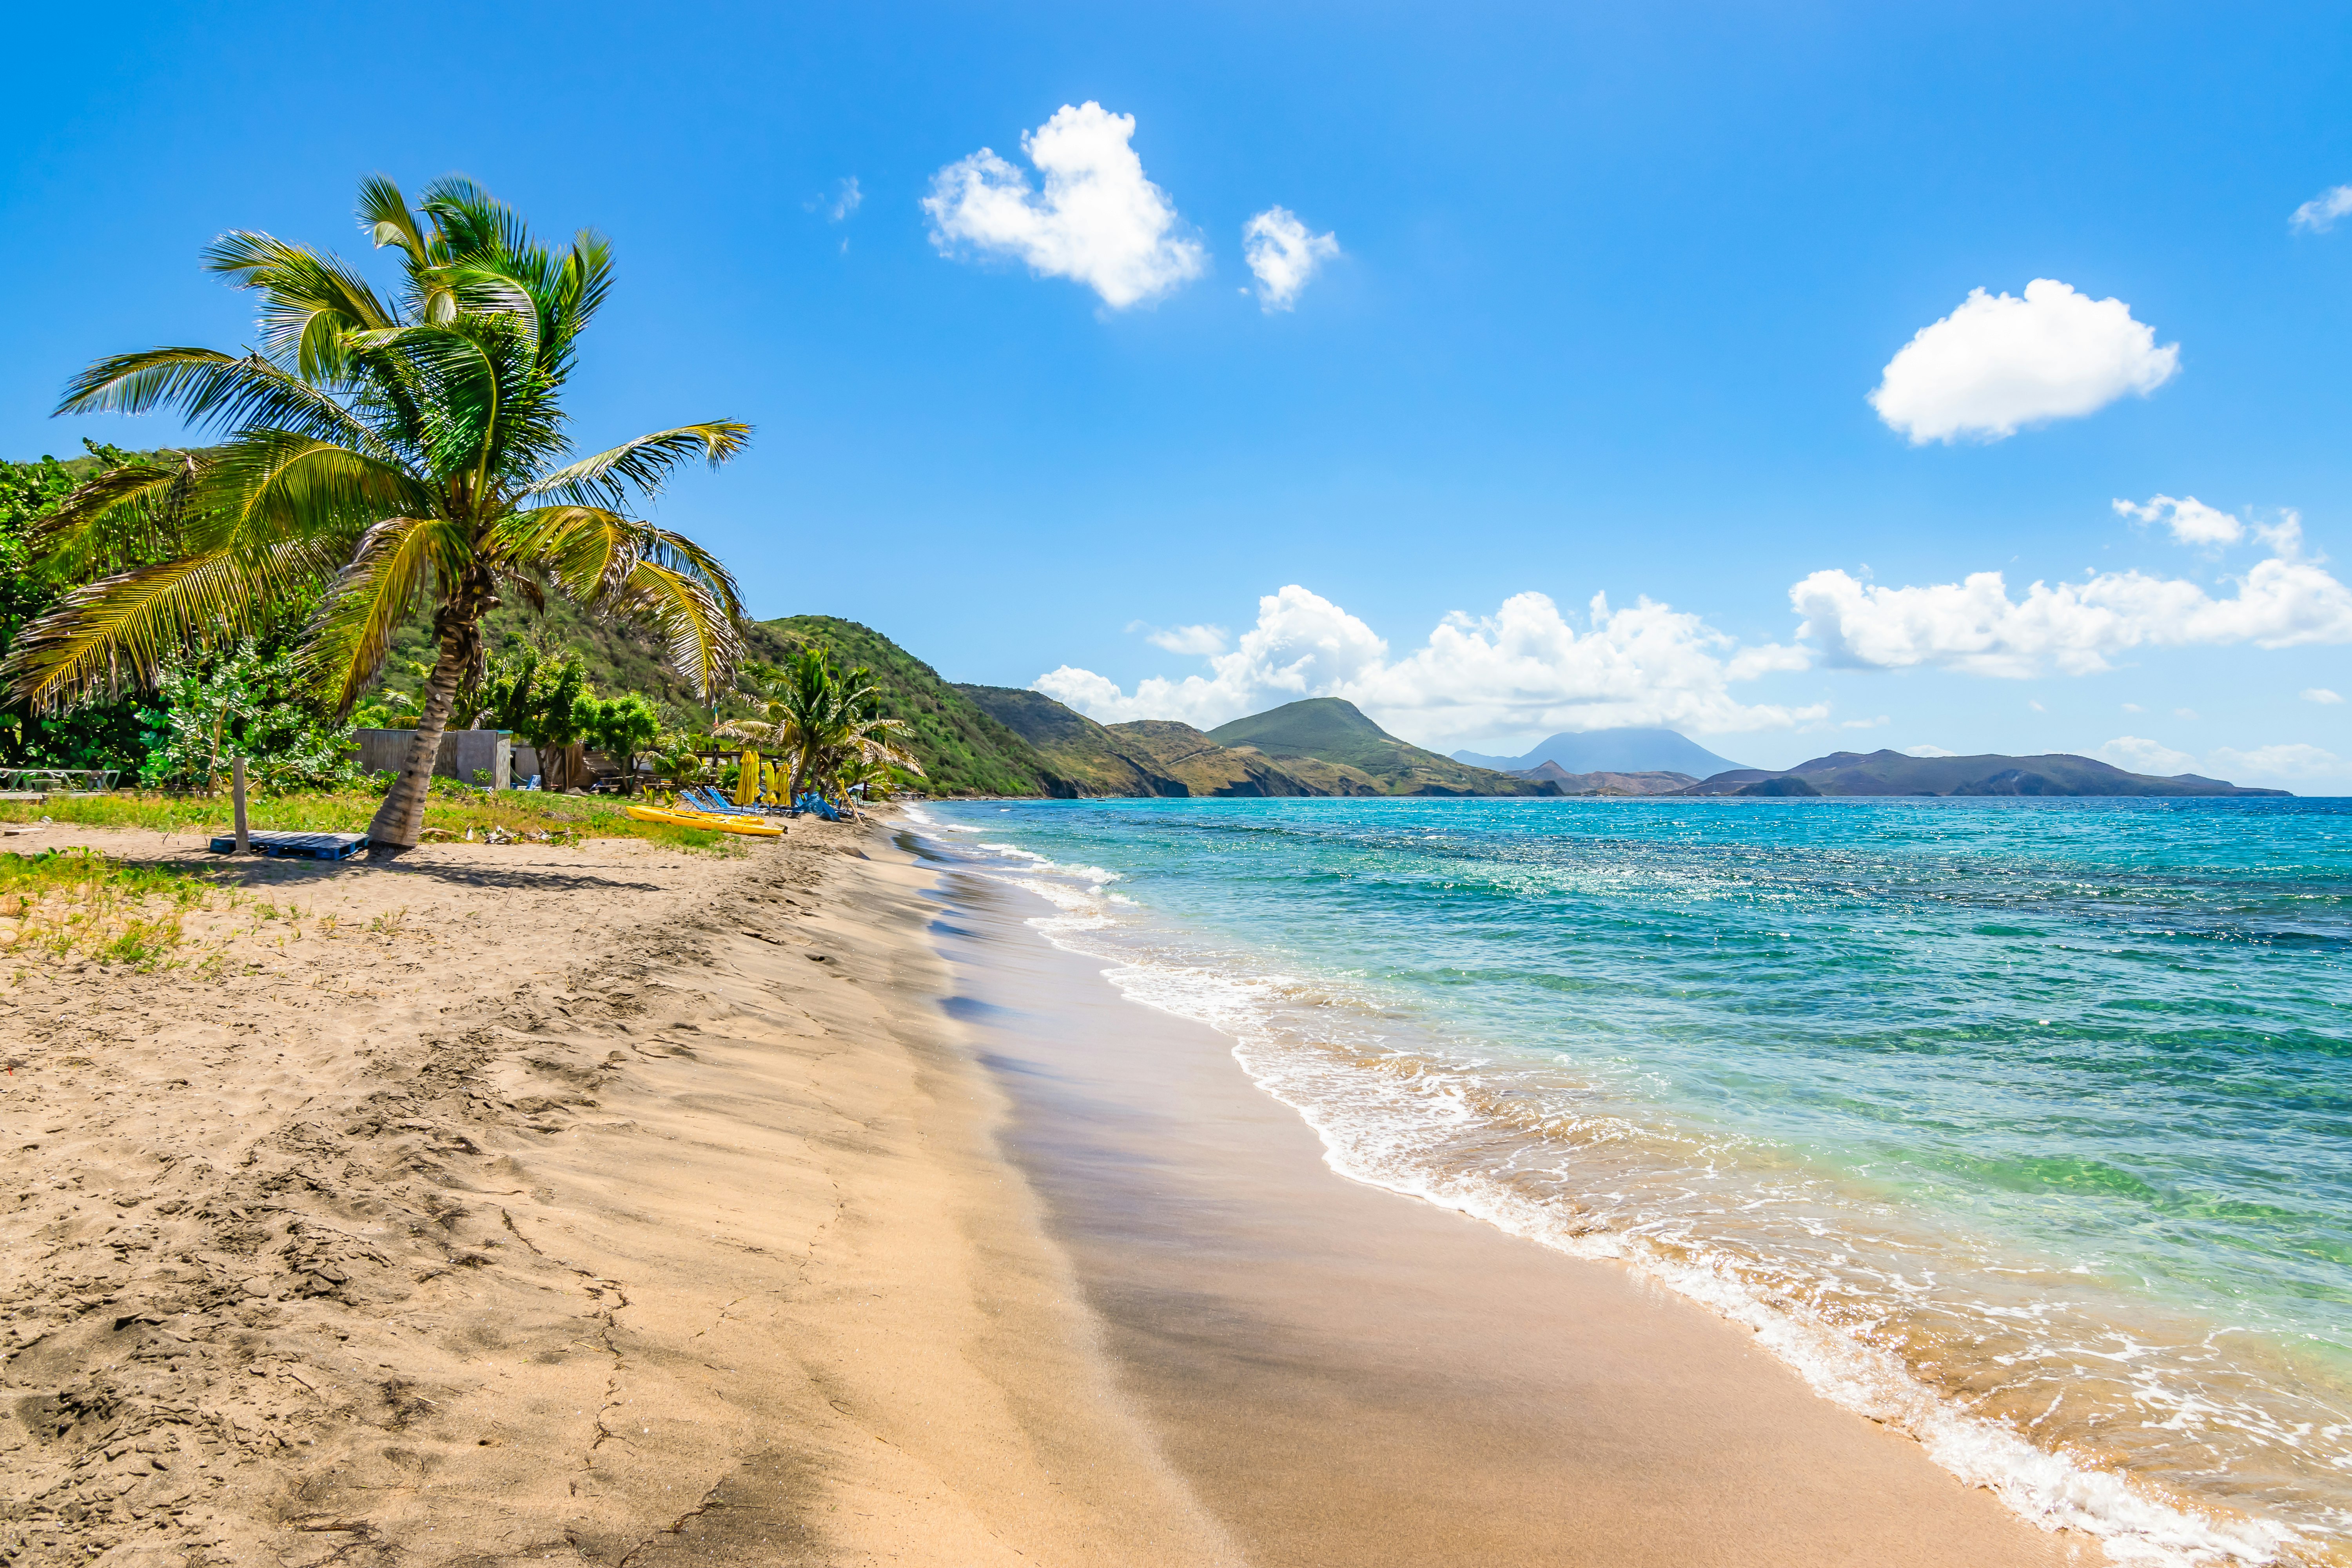 A perfect sandy beach lined with palm trees in St Kitts